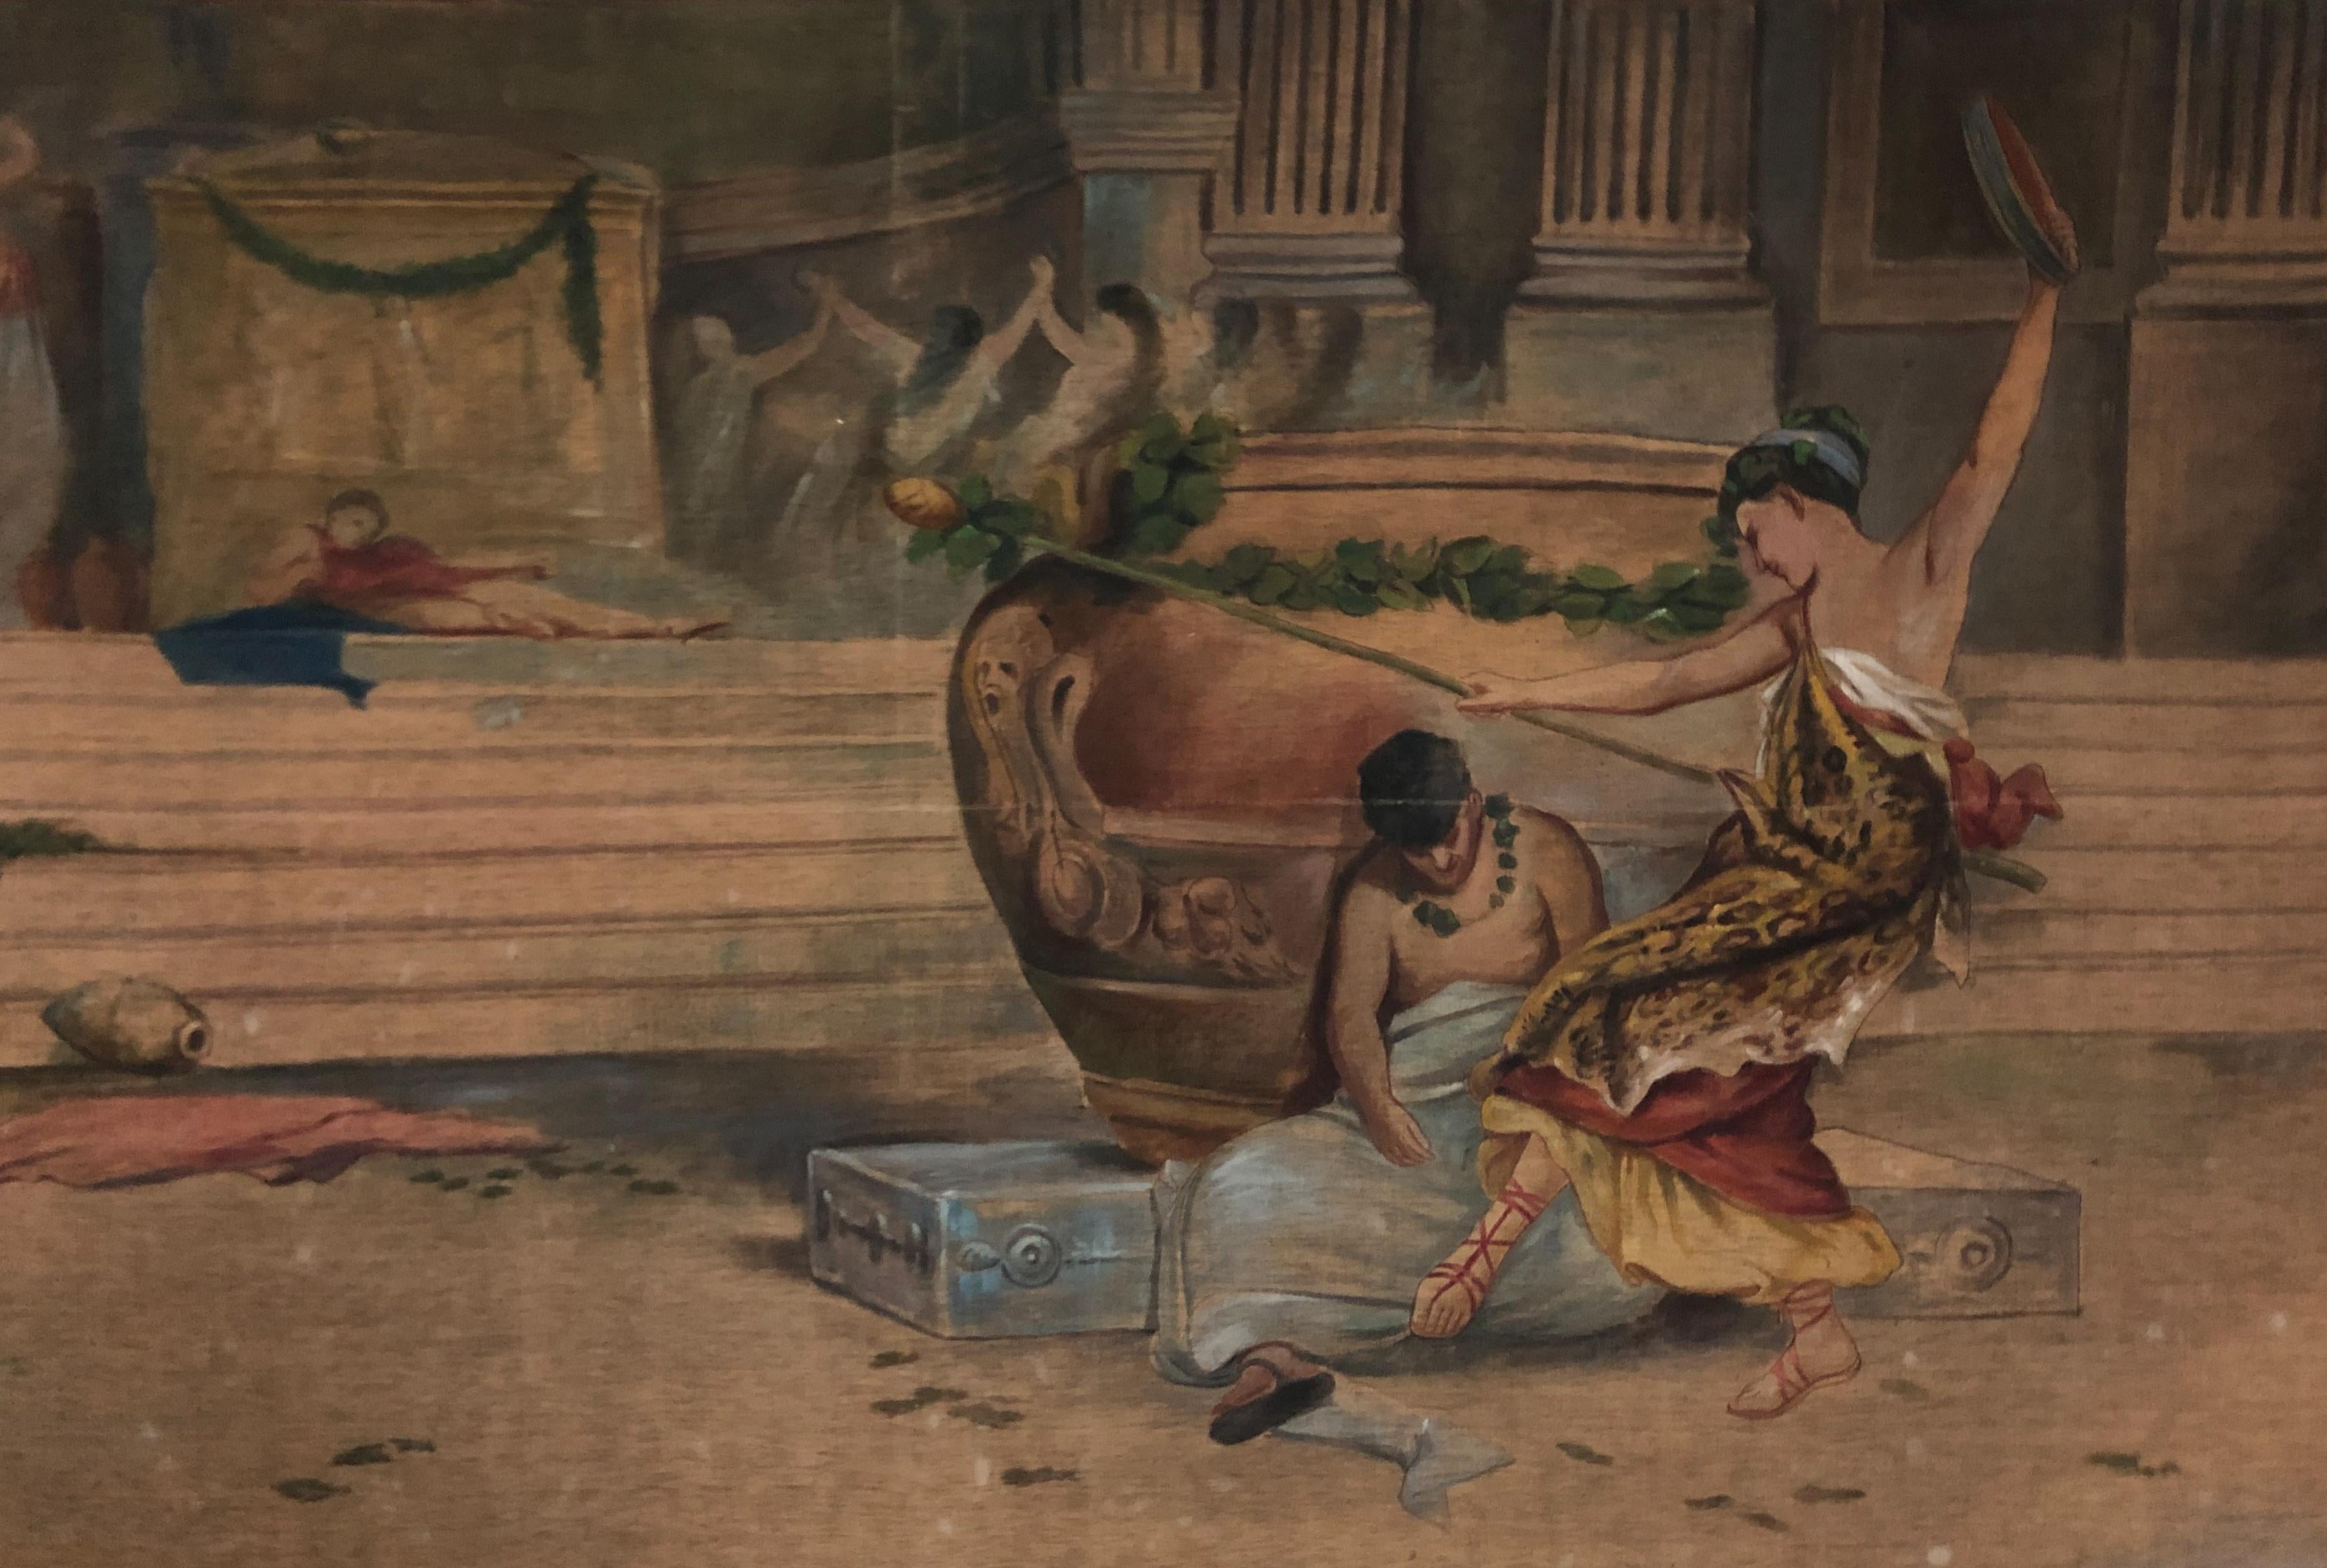 A very beautiful and classical Roman scene arras, made with the using of herb juice, an ancient arras technique invented in Japan and then diffused from the 17th-19th century in Europe and in Italy. The painting show a classical scene of roman life